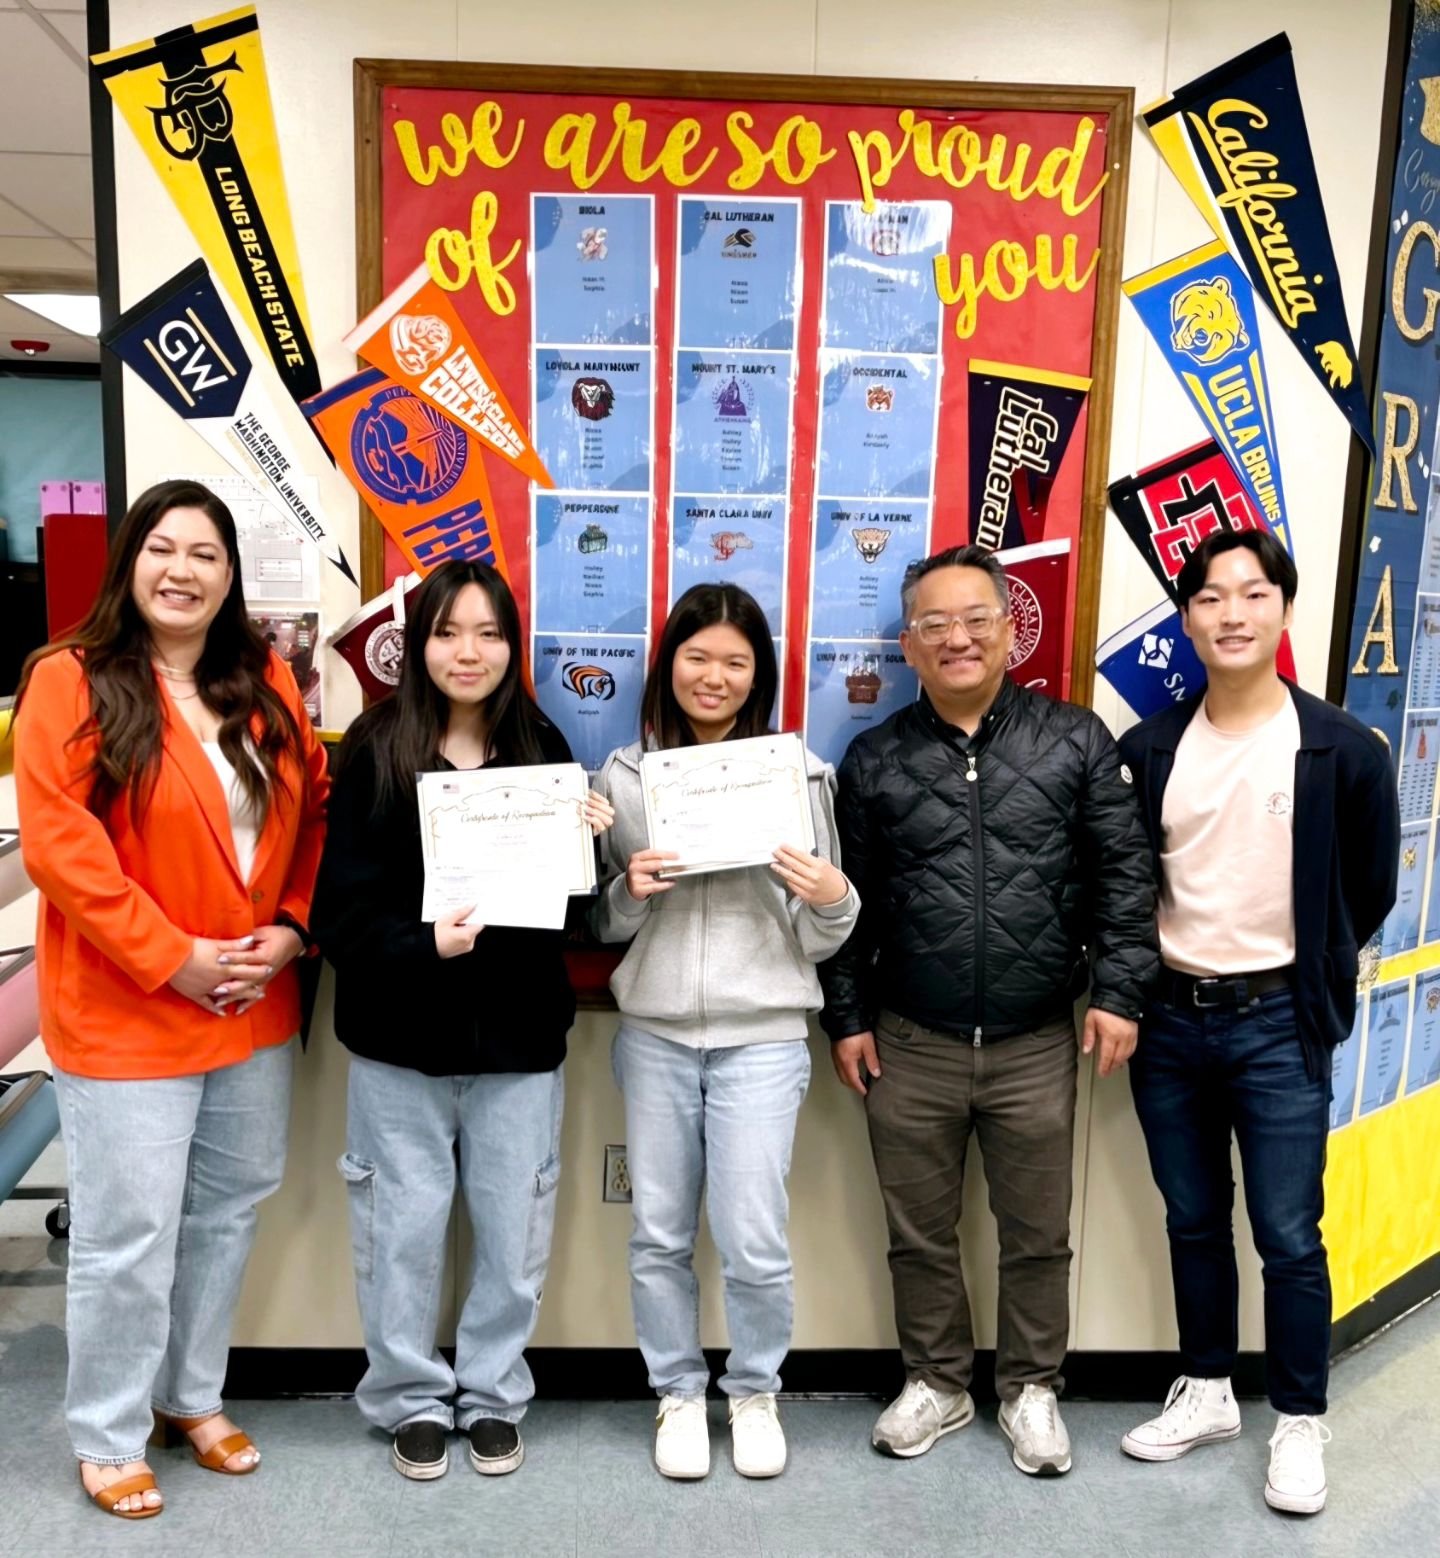 Congratulations to Esther Lee and Lauren Yoon from Rise Kohyang High School for receiving scholarships! We awarded these scholarships for their academic excellence in school. They are both graduating seniors this year and have received acceptance to 